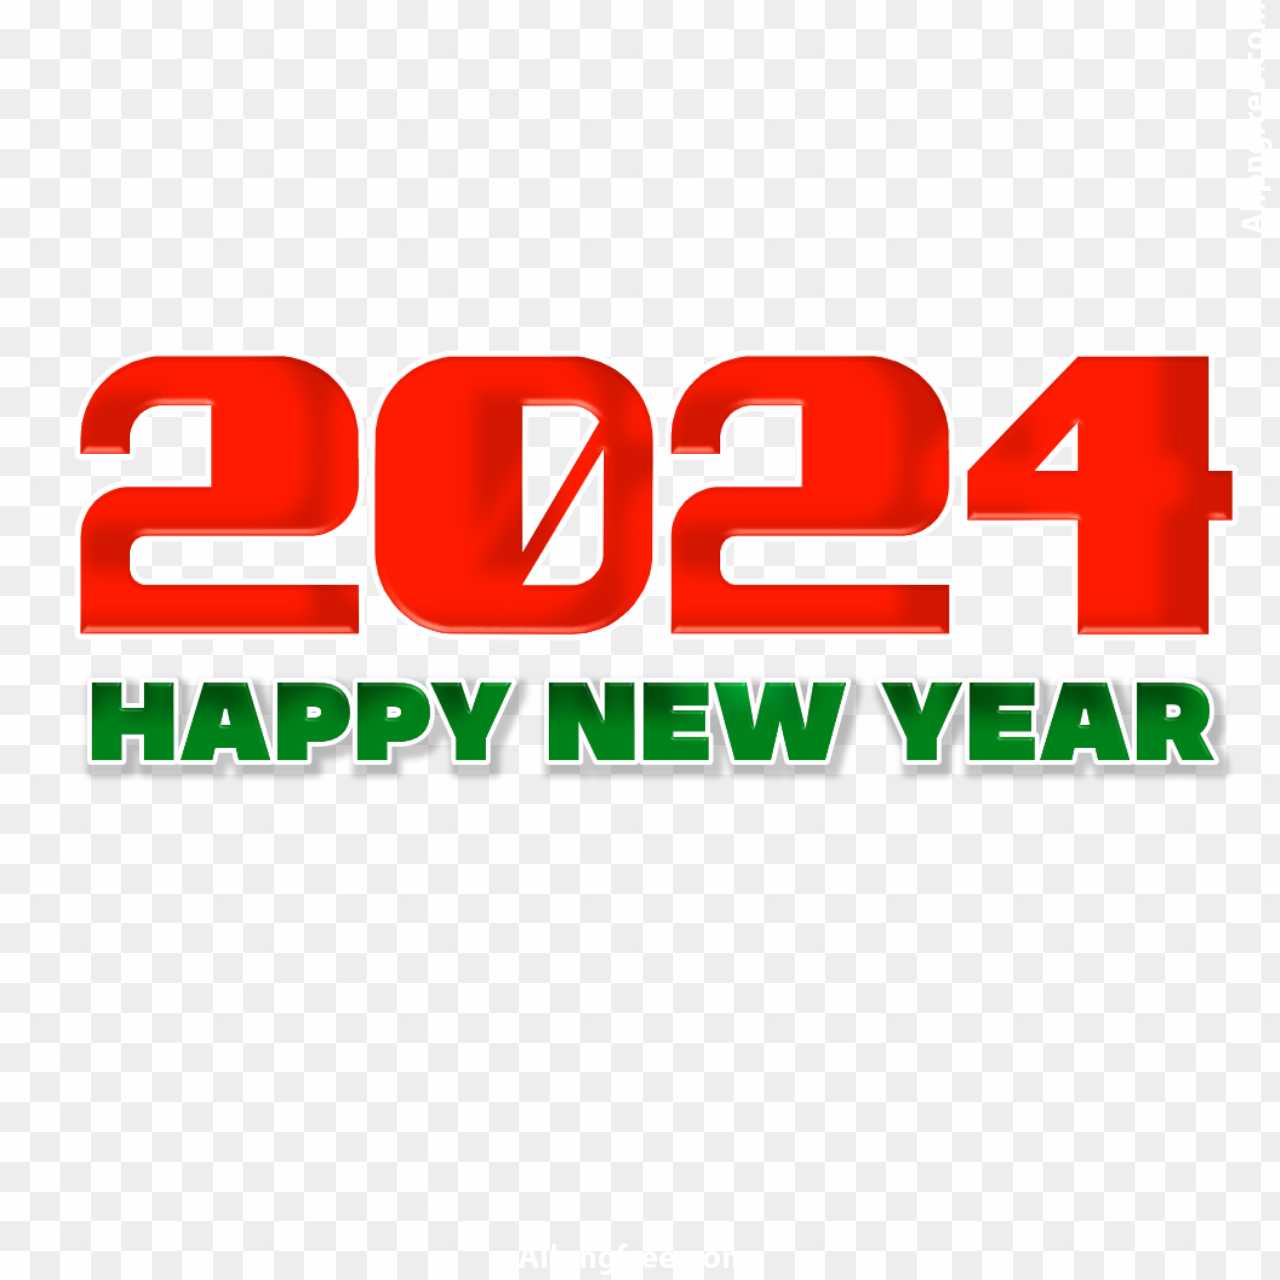 2024 Happy New Year PNG images download 